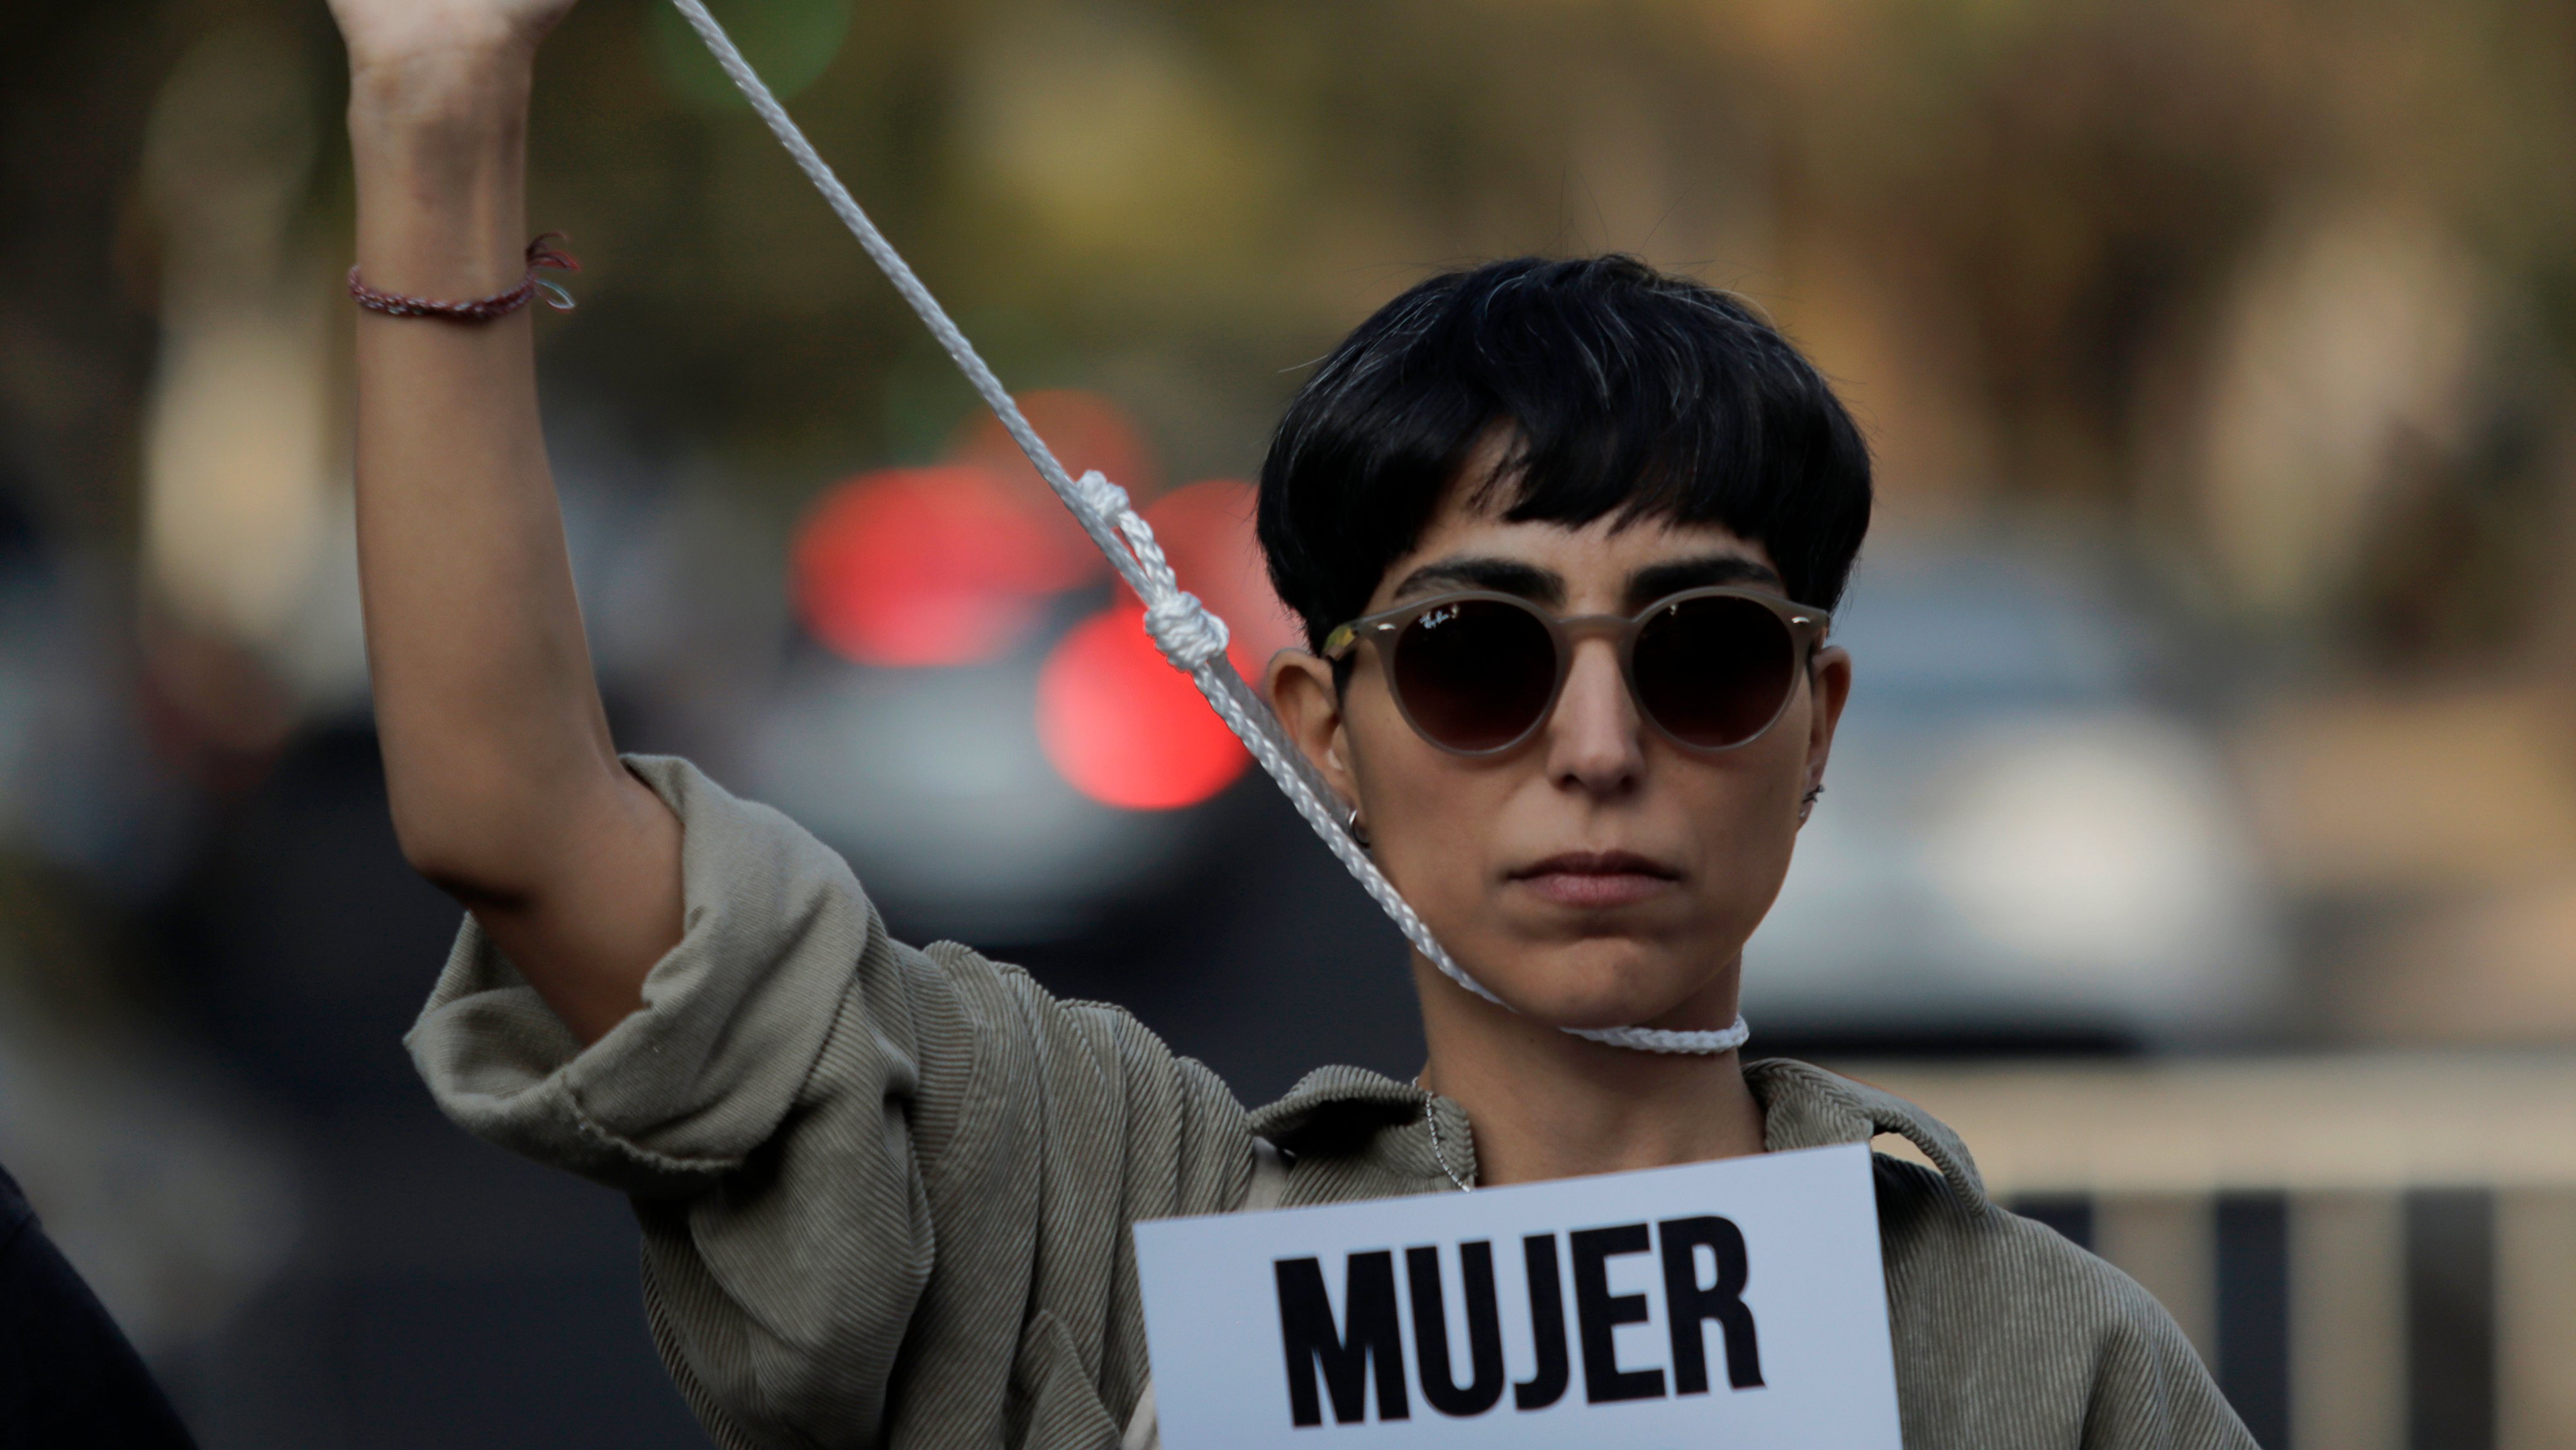 Demonstrators Protest Outside The Embassy Of The Islamic Republic Of Iran In Mexico After Arrests And Executions In Iran